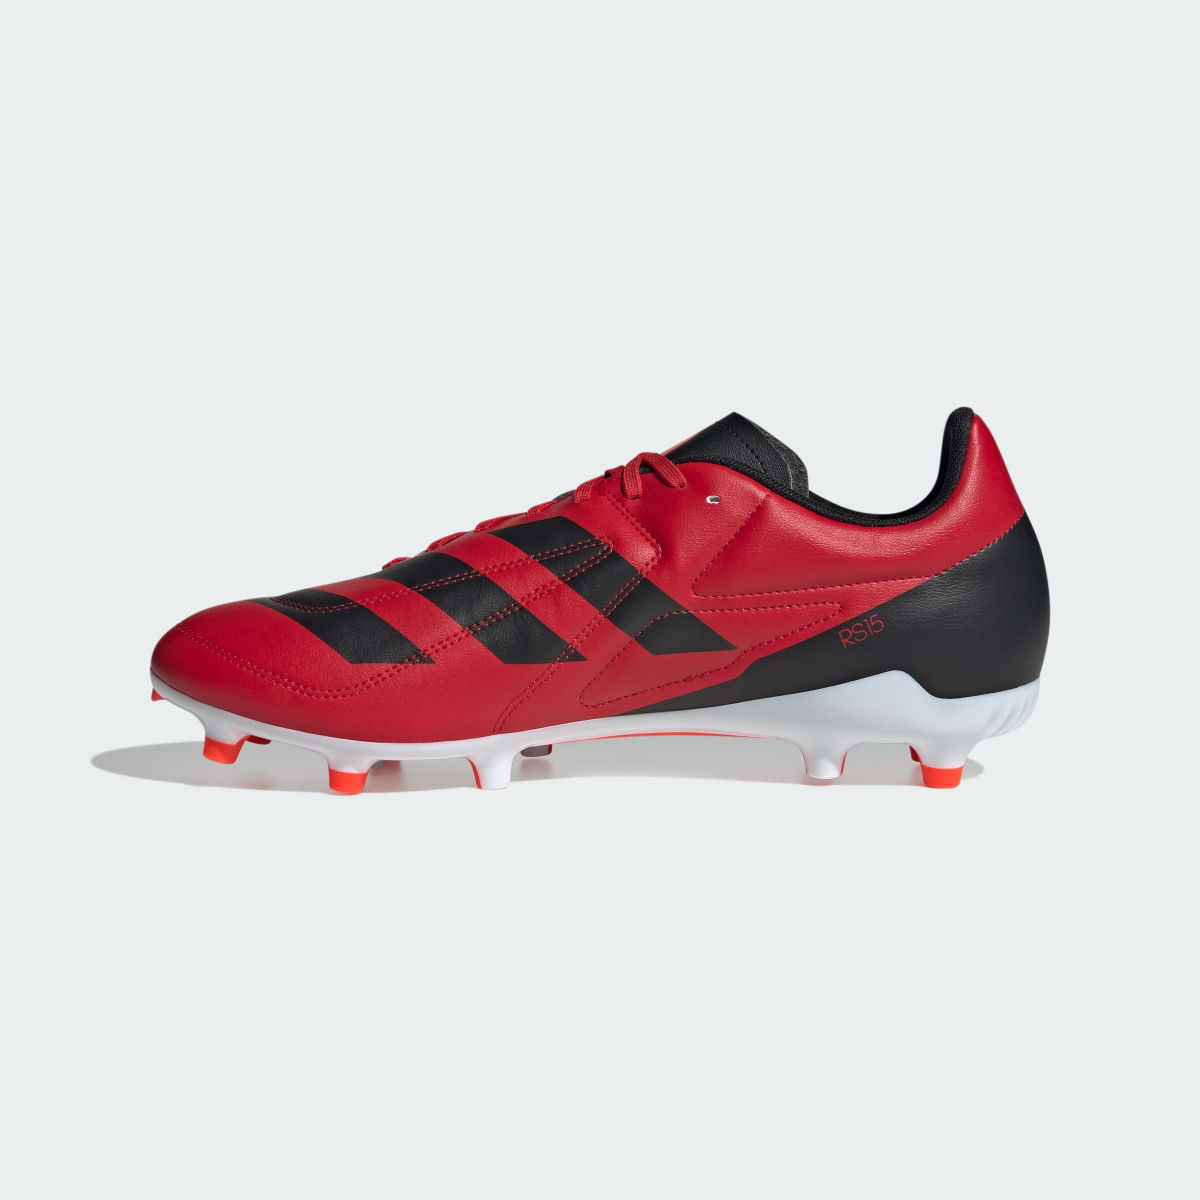 Adidas RS15 Firm Ground Rugby Boots. 7